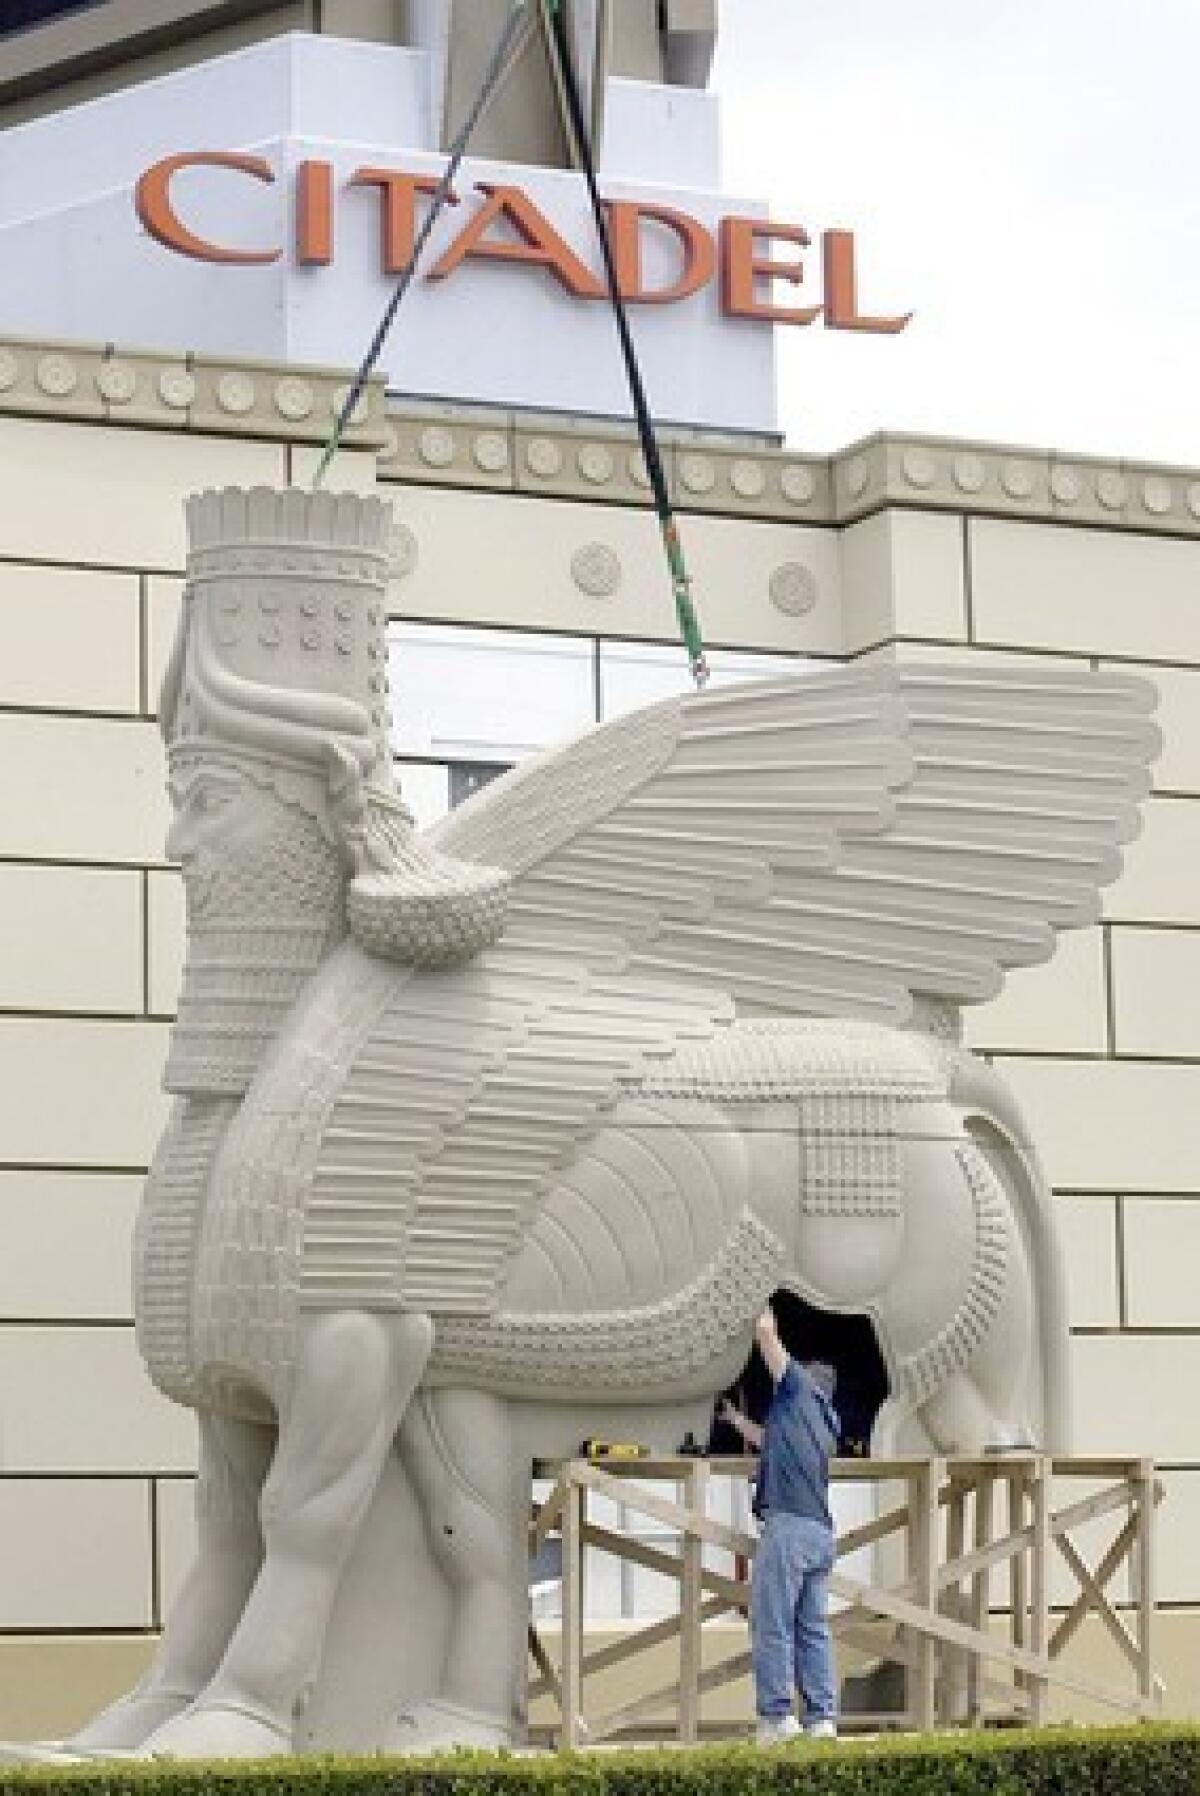 A lamassu (shown here during a nonholiday time) is an ancient design of a creature with animal legs, bird wings and the face of a man. The statue is at the Citadel Outlets in Commerce.